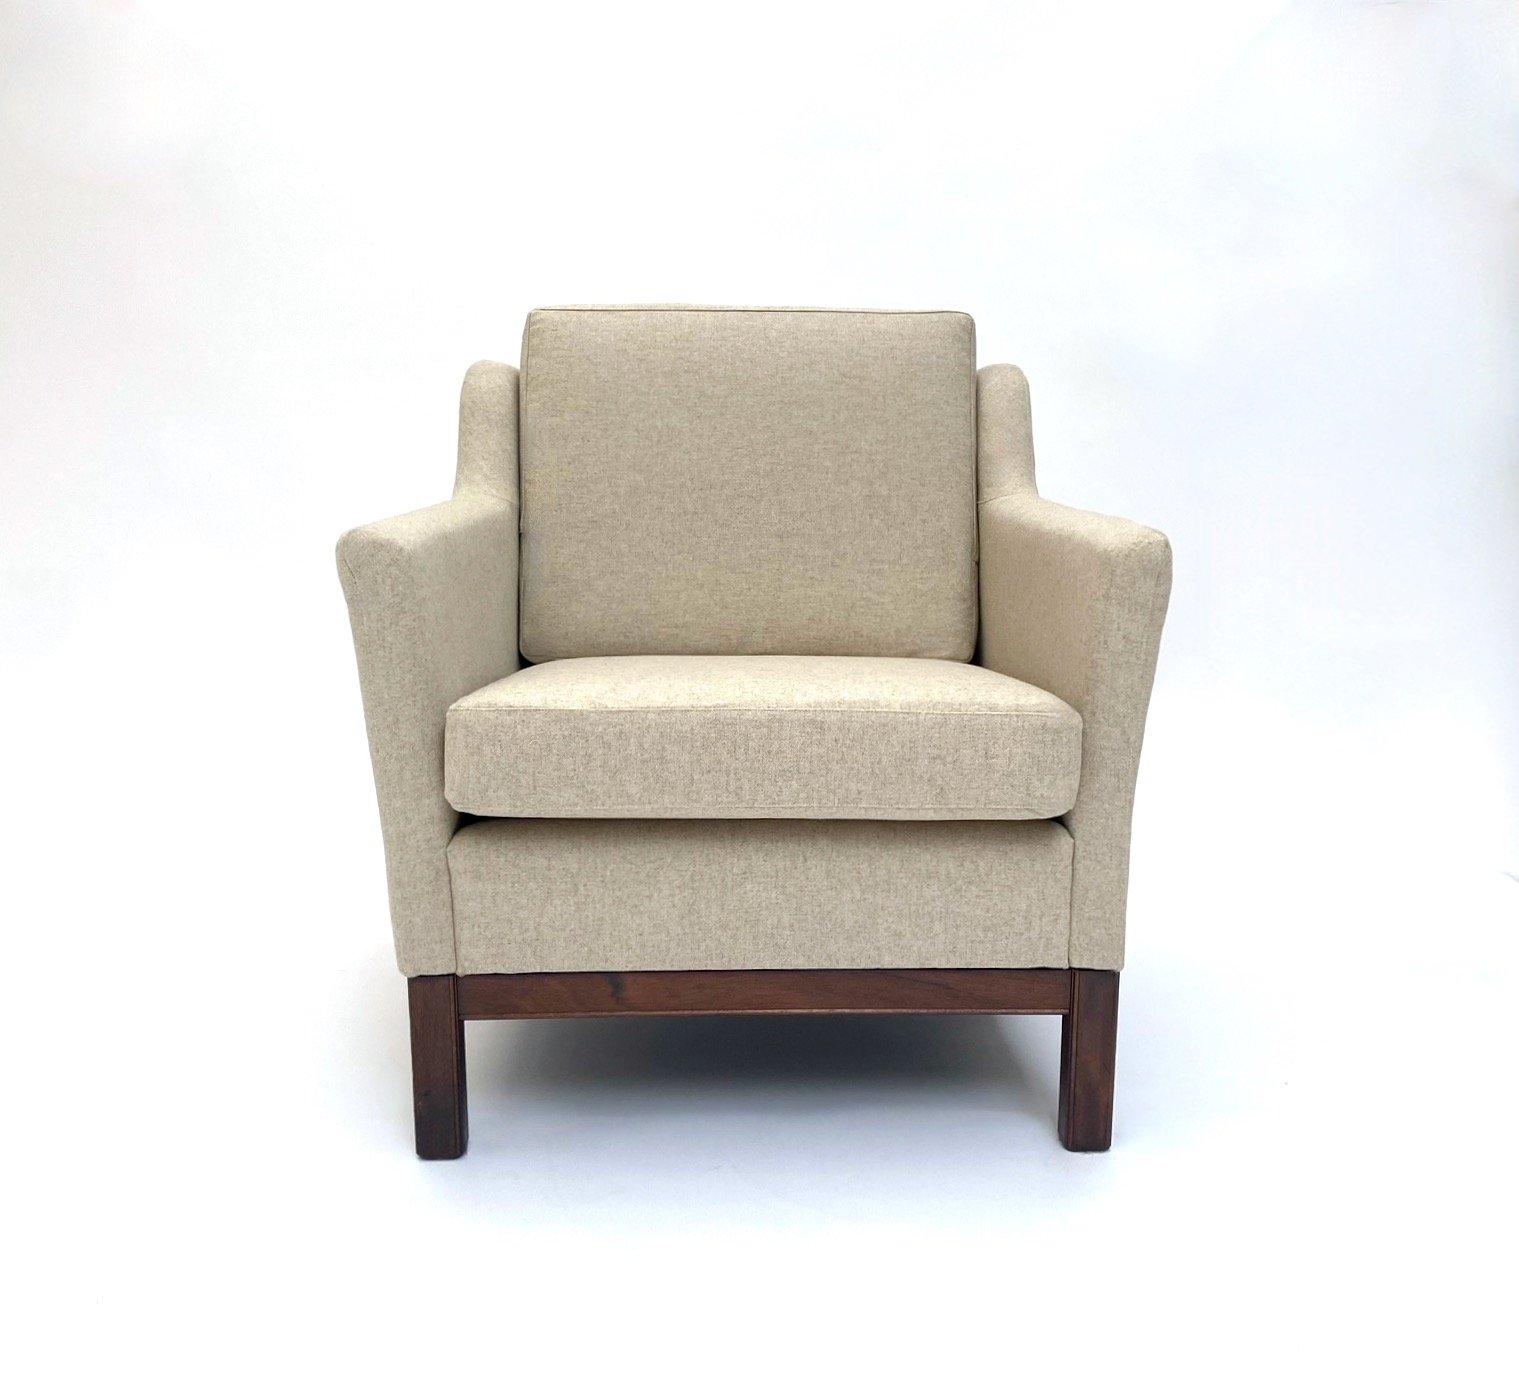 A beautiful Danish cream wool and teak armchair, this would make a stylish addition to any living or work area.

The chair has a wide seat and padded backrest for enhanced comfort. A striking piece of classic Scandinavian furniture.

The chair is in